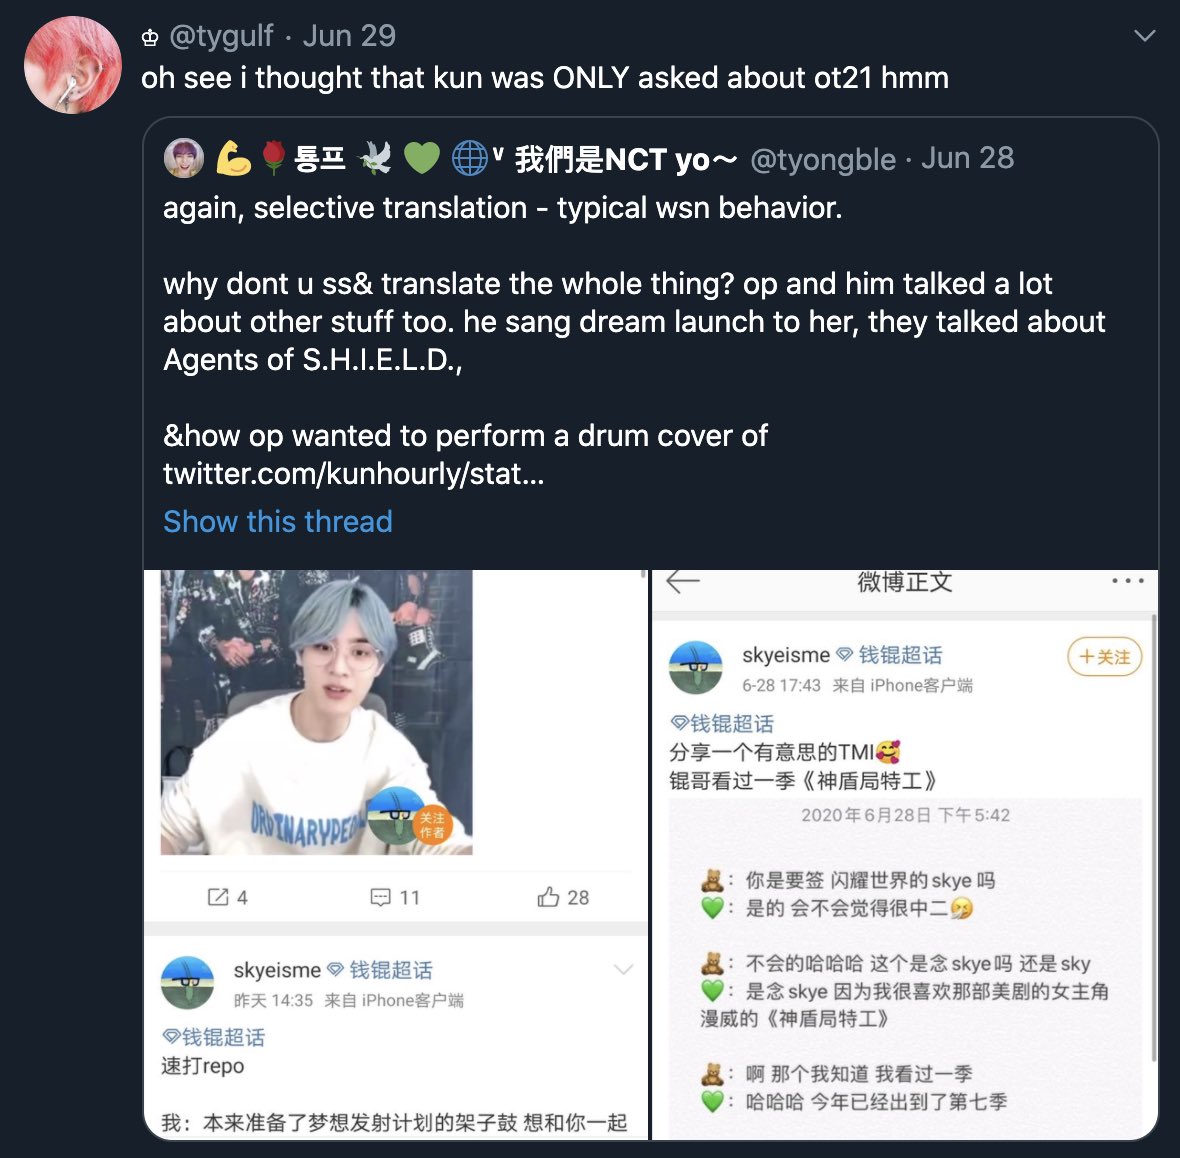 Separatists also claimed Kun had previously asked fans “multiple times” not to ask about NCT 2020 anymore, but that’s an out of context exaggeration. They’re referring to Kun’s April 19 yizhibo live where ot21 cfans kept writing NCT 2020 in the comments because they were curious